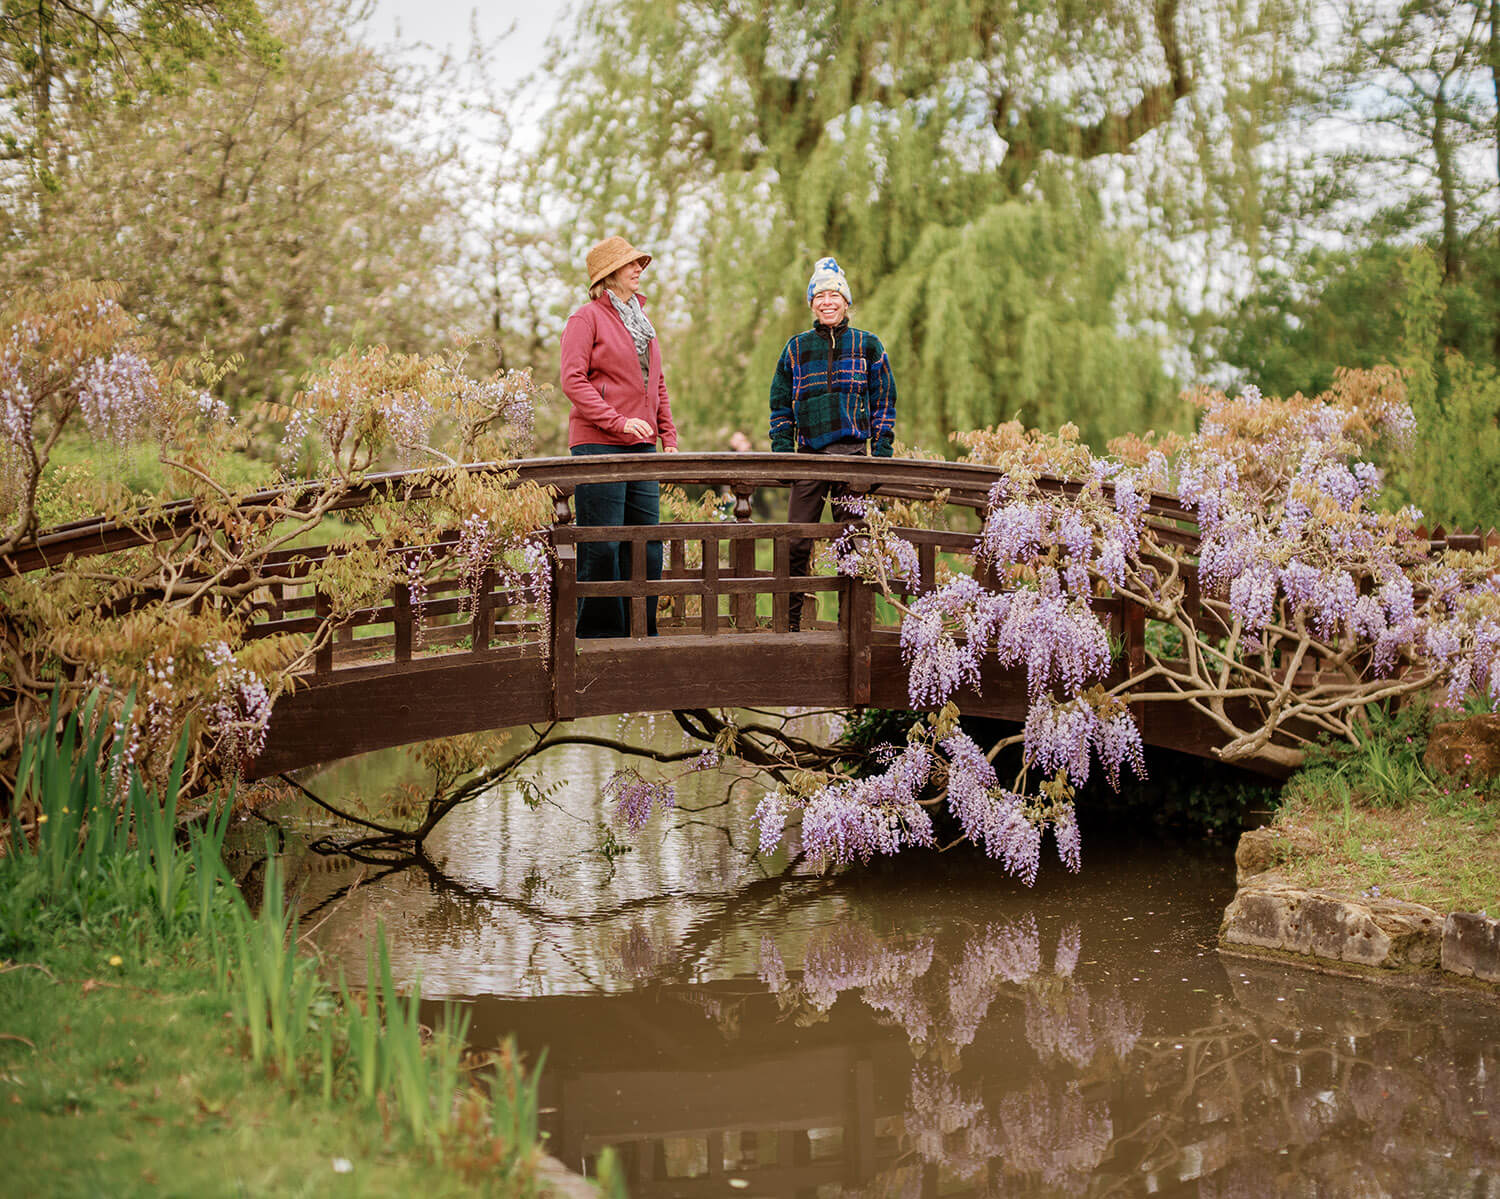 Two people on a picturesque wooden bridge in The Regent's Park